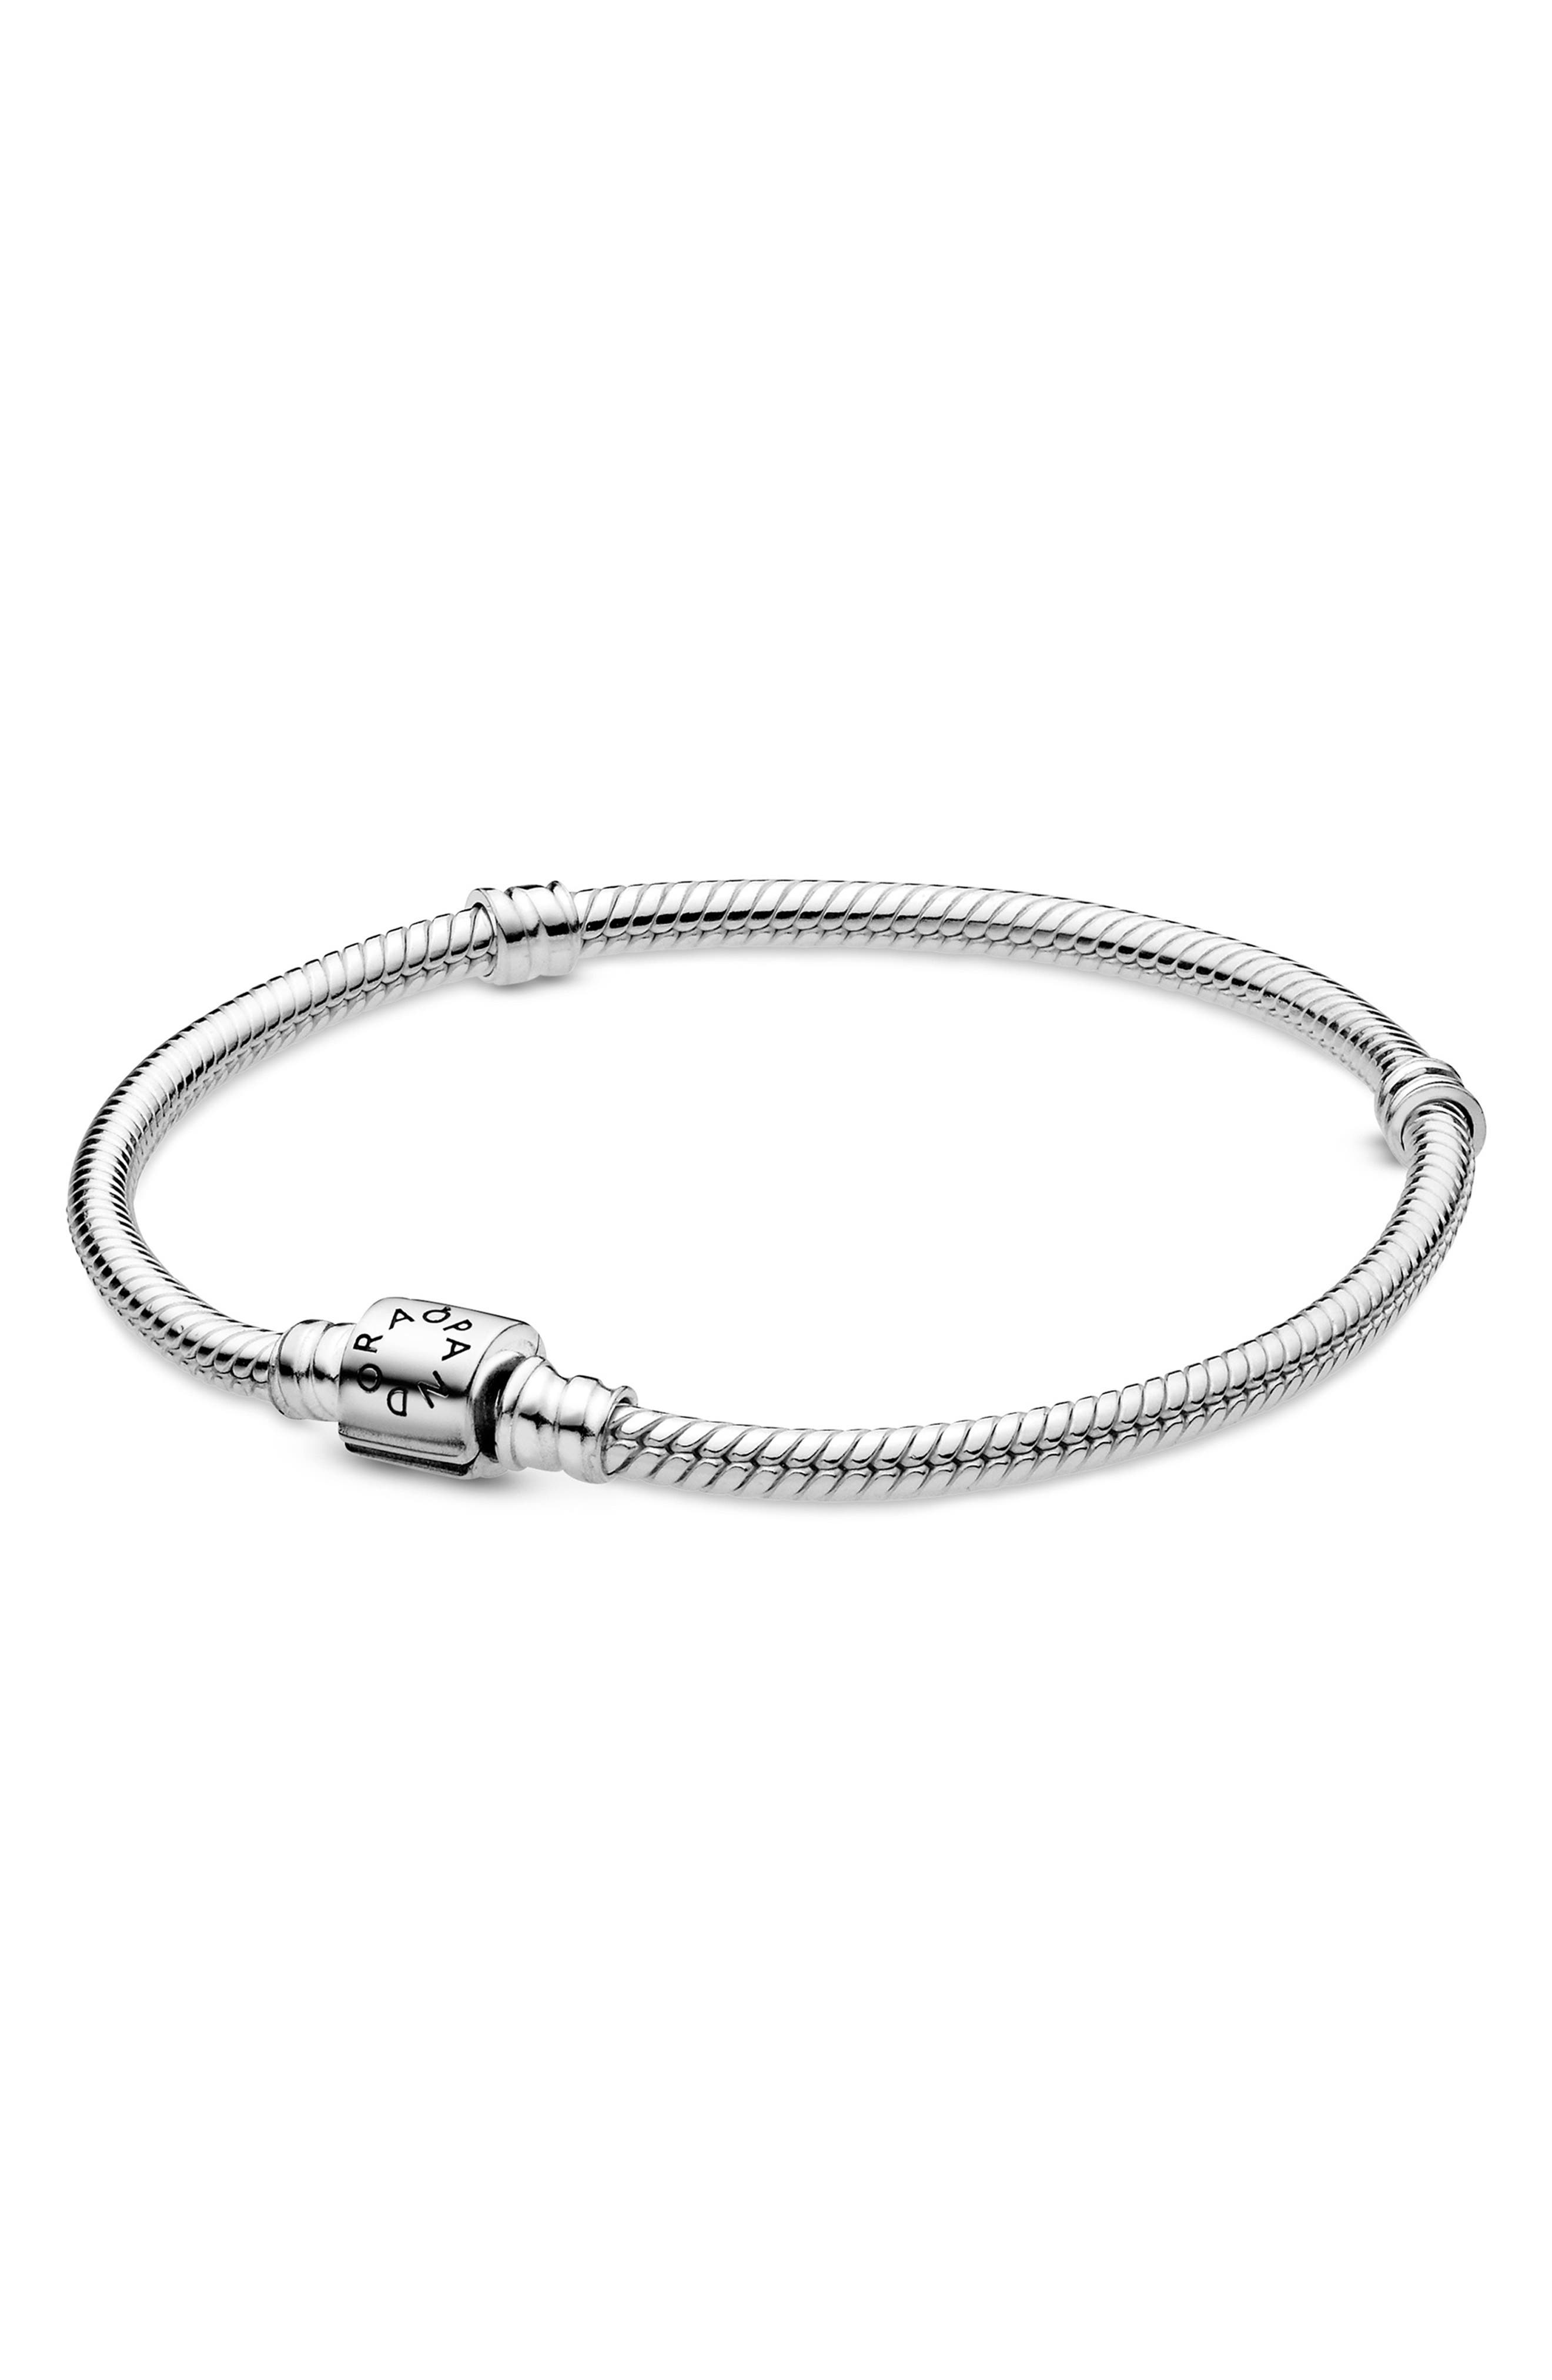 PANDORA Moments Barrel Clasp Snake Chain Bracelet, Size 7.9 in Silver at Nordstrom